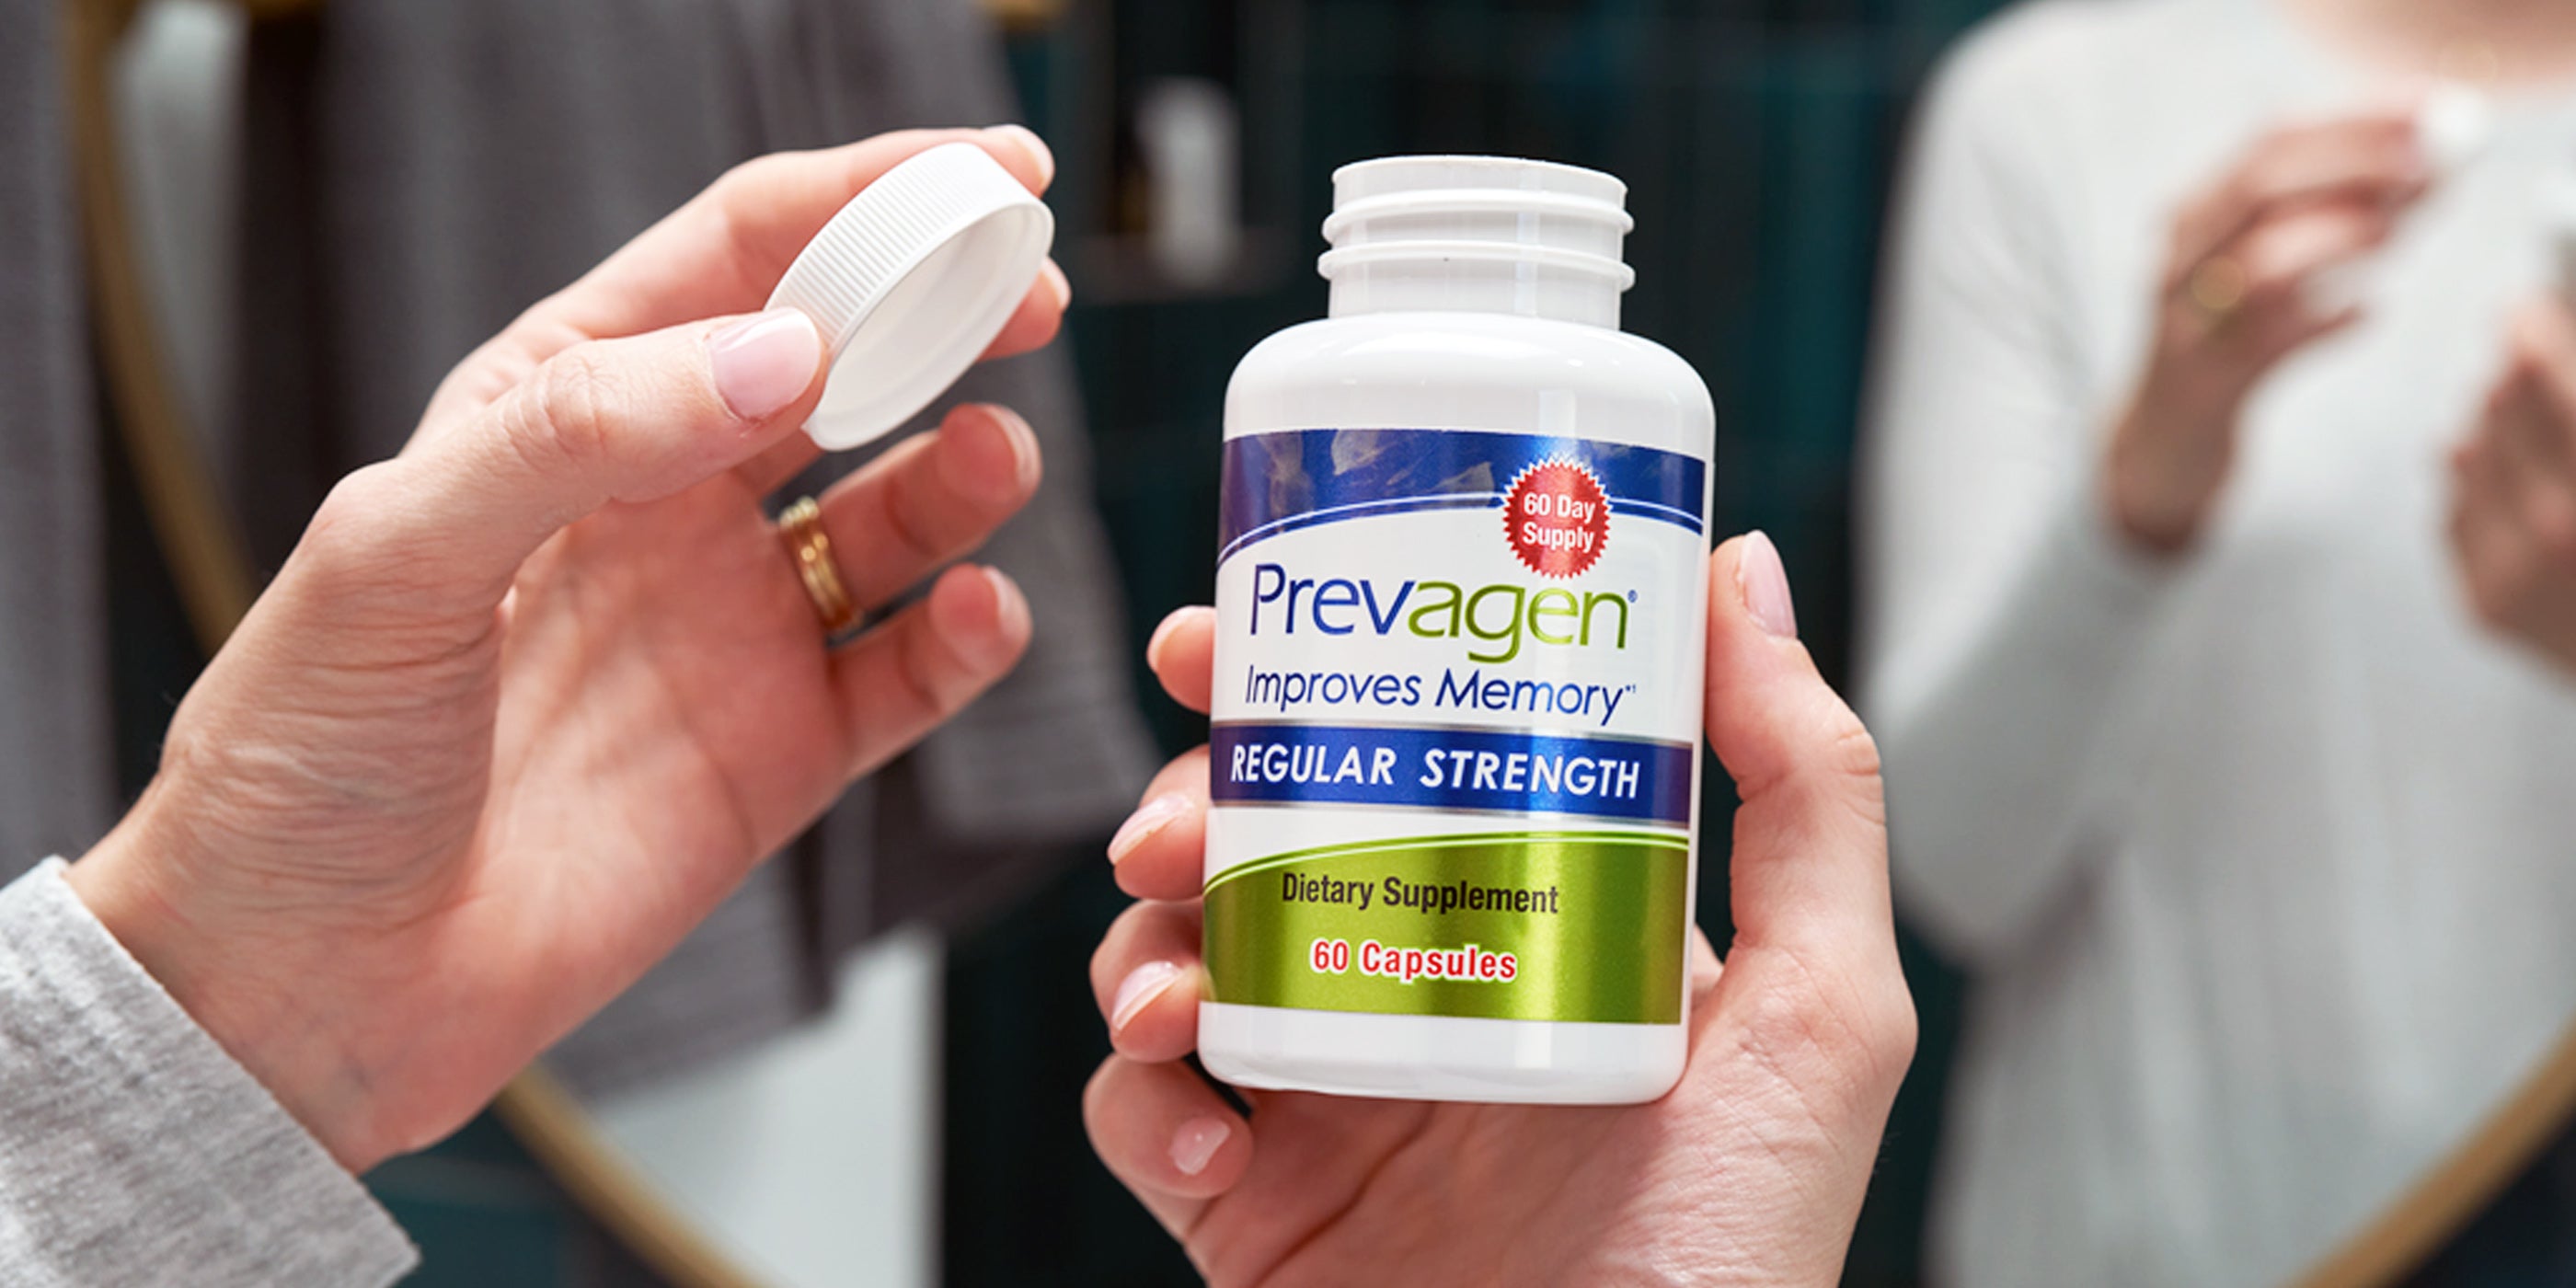 Bottle of Prevagen regular strength 60 day supply held by woman at bathroom counter